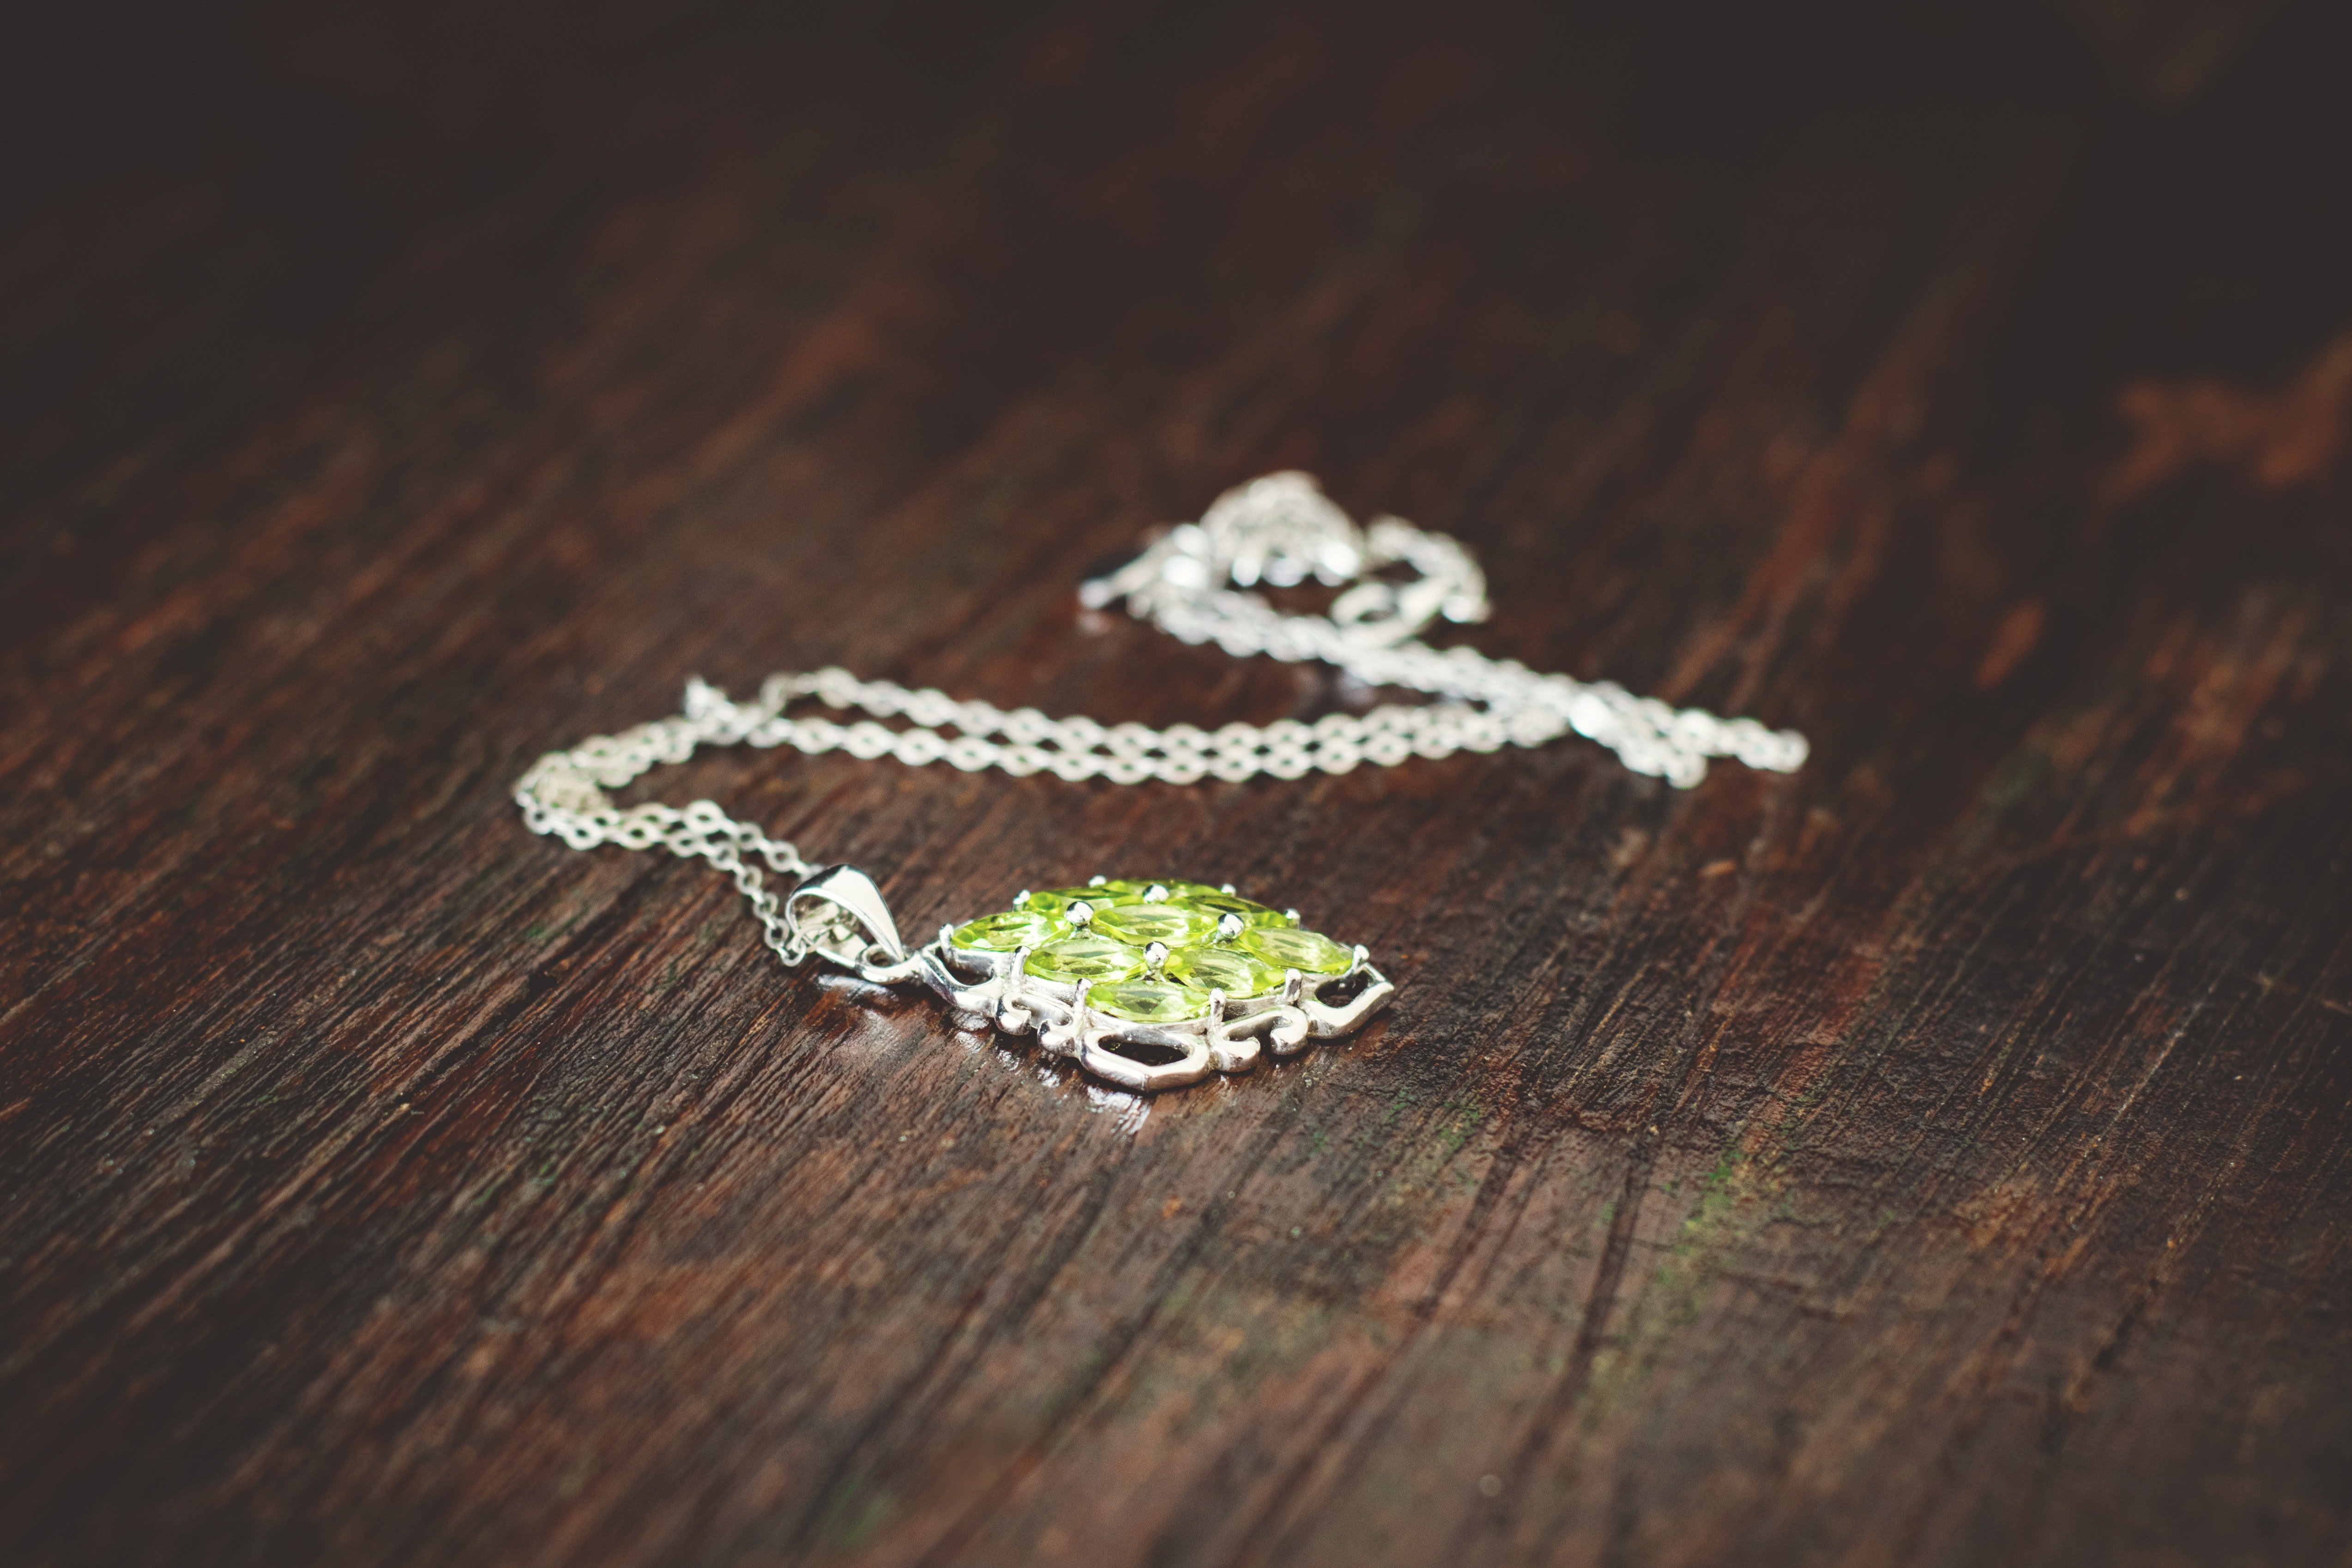 The man handed Jessica a necklace which he said once belonged to her mother. | Source: Pexels